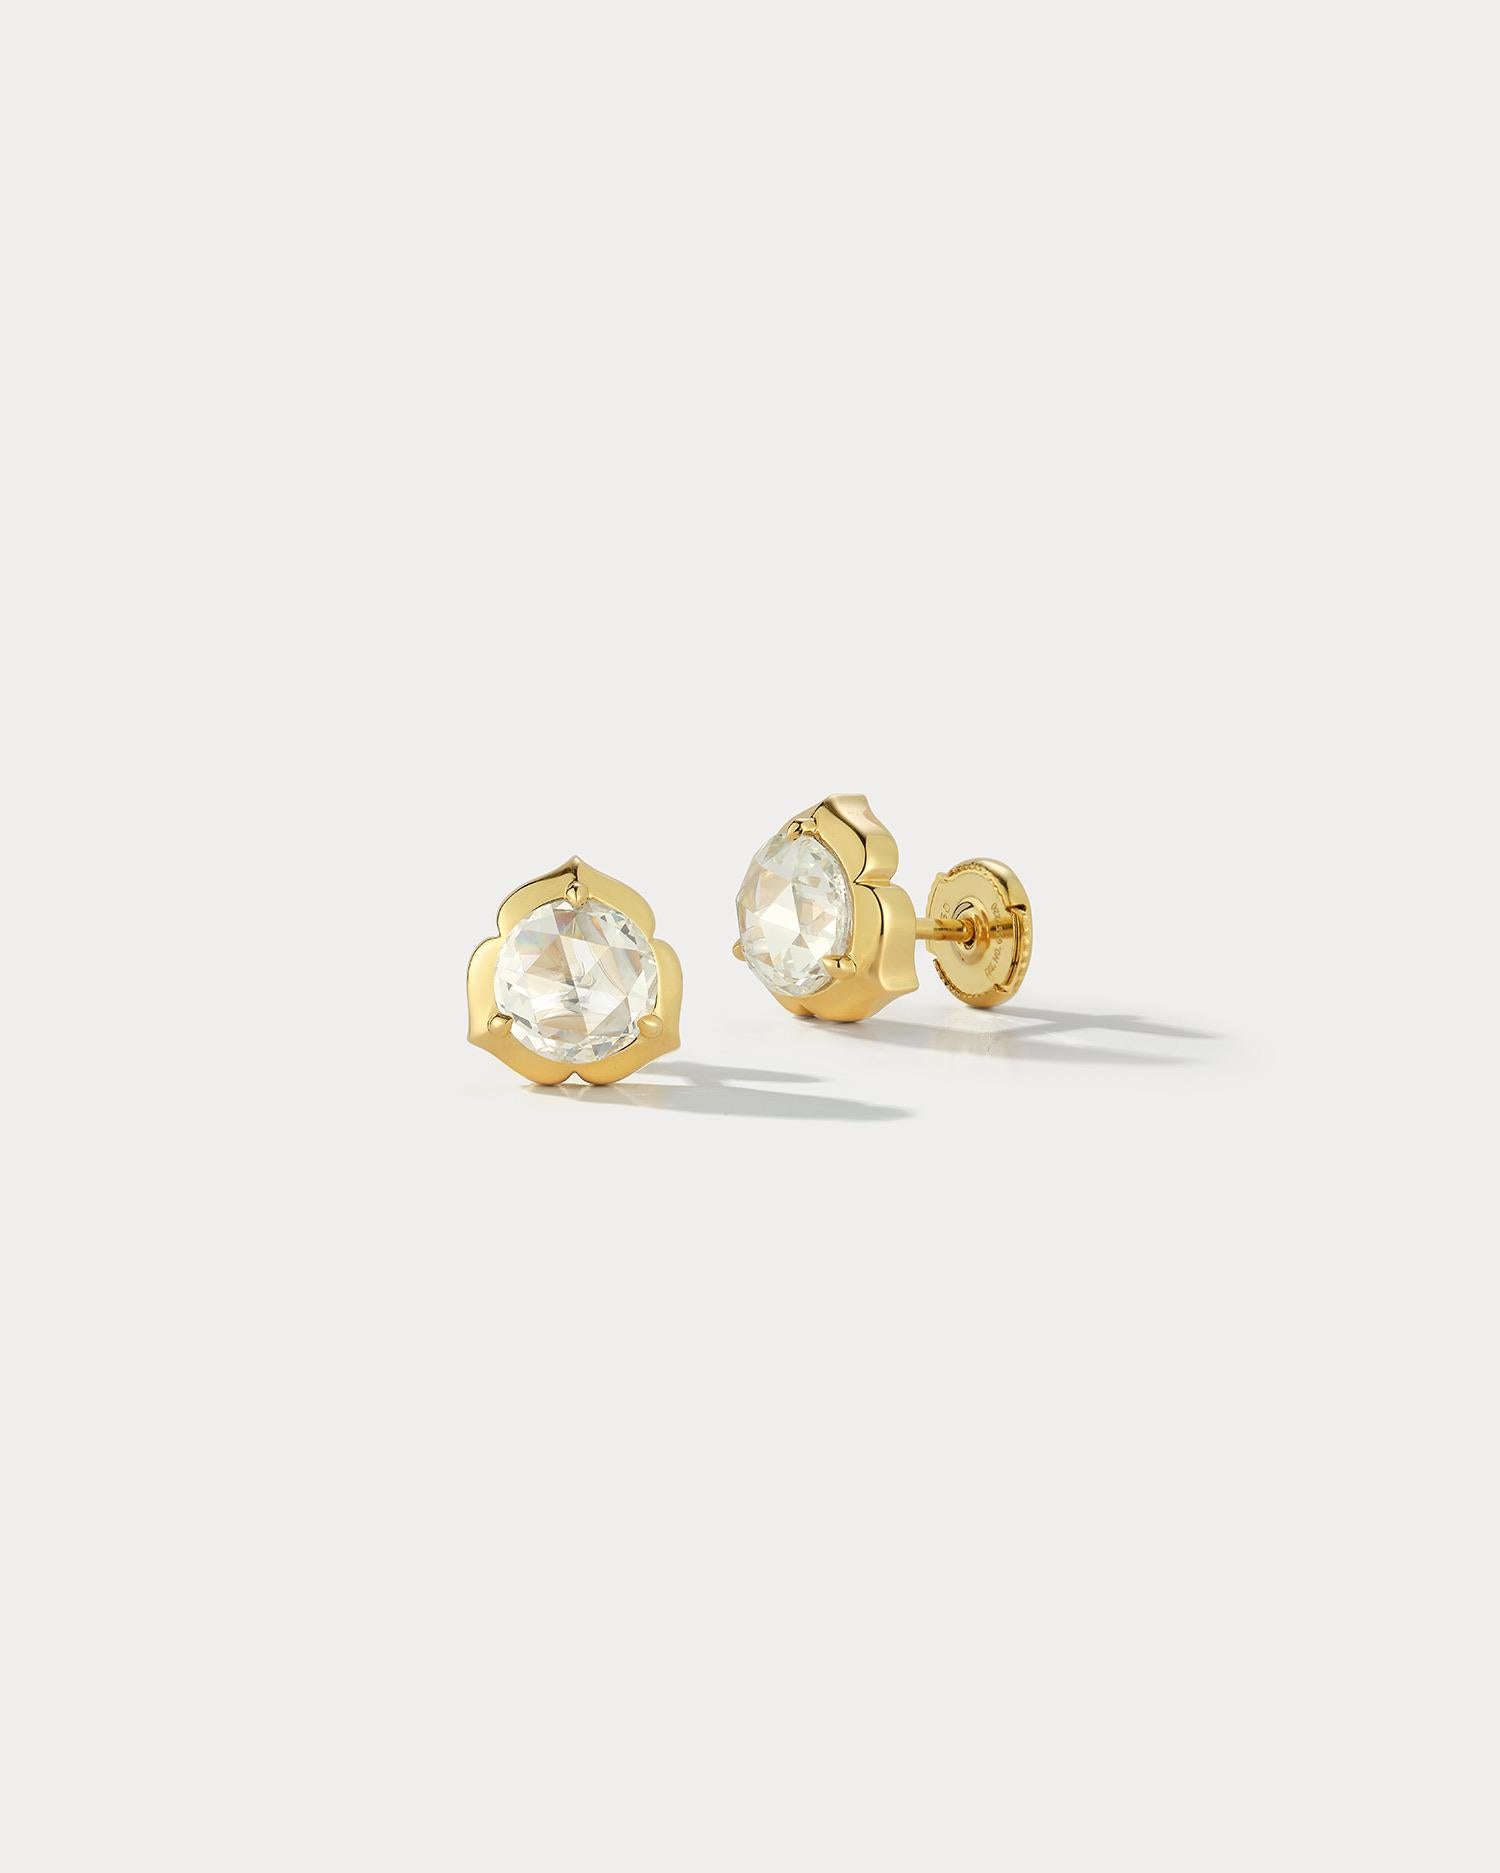 Introducing the Ammrada signature diamond collection, featuring 2.27 carats of mesmerizing rose cut diamonds set in 18k yellow gold. The warm glow of the yellow gold perfectly complements the unique and organic charm of the rose cut diamonds,